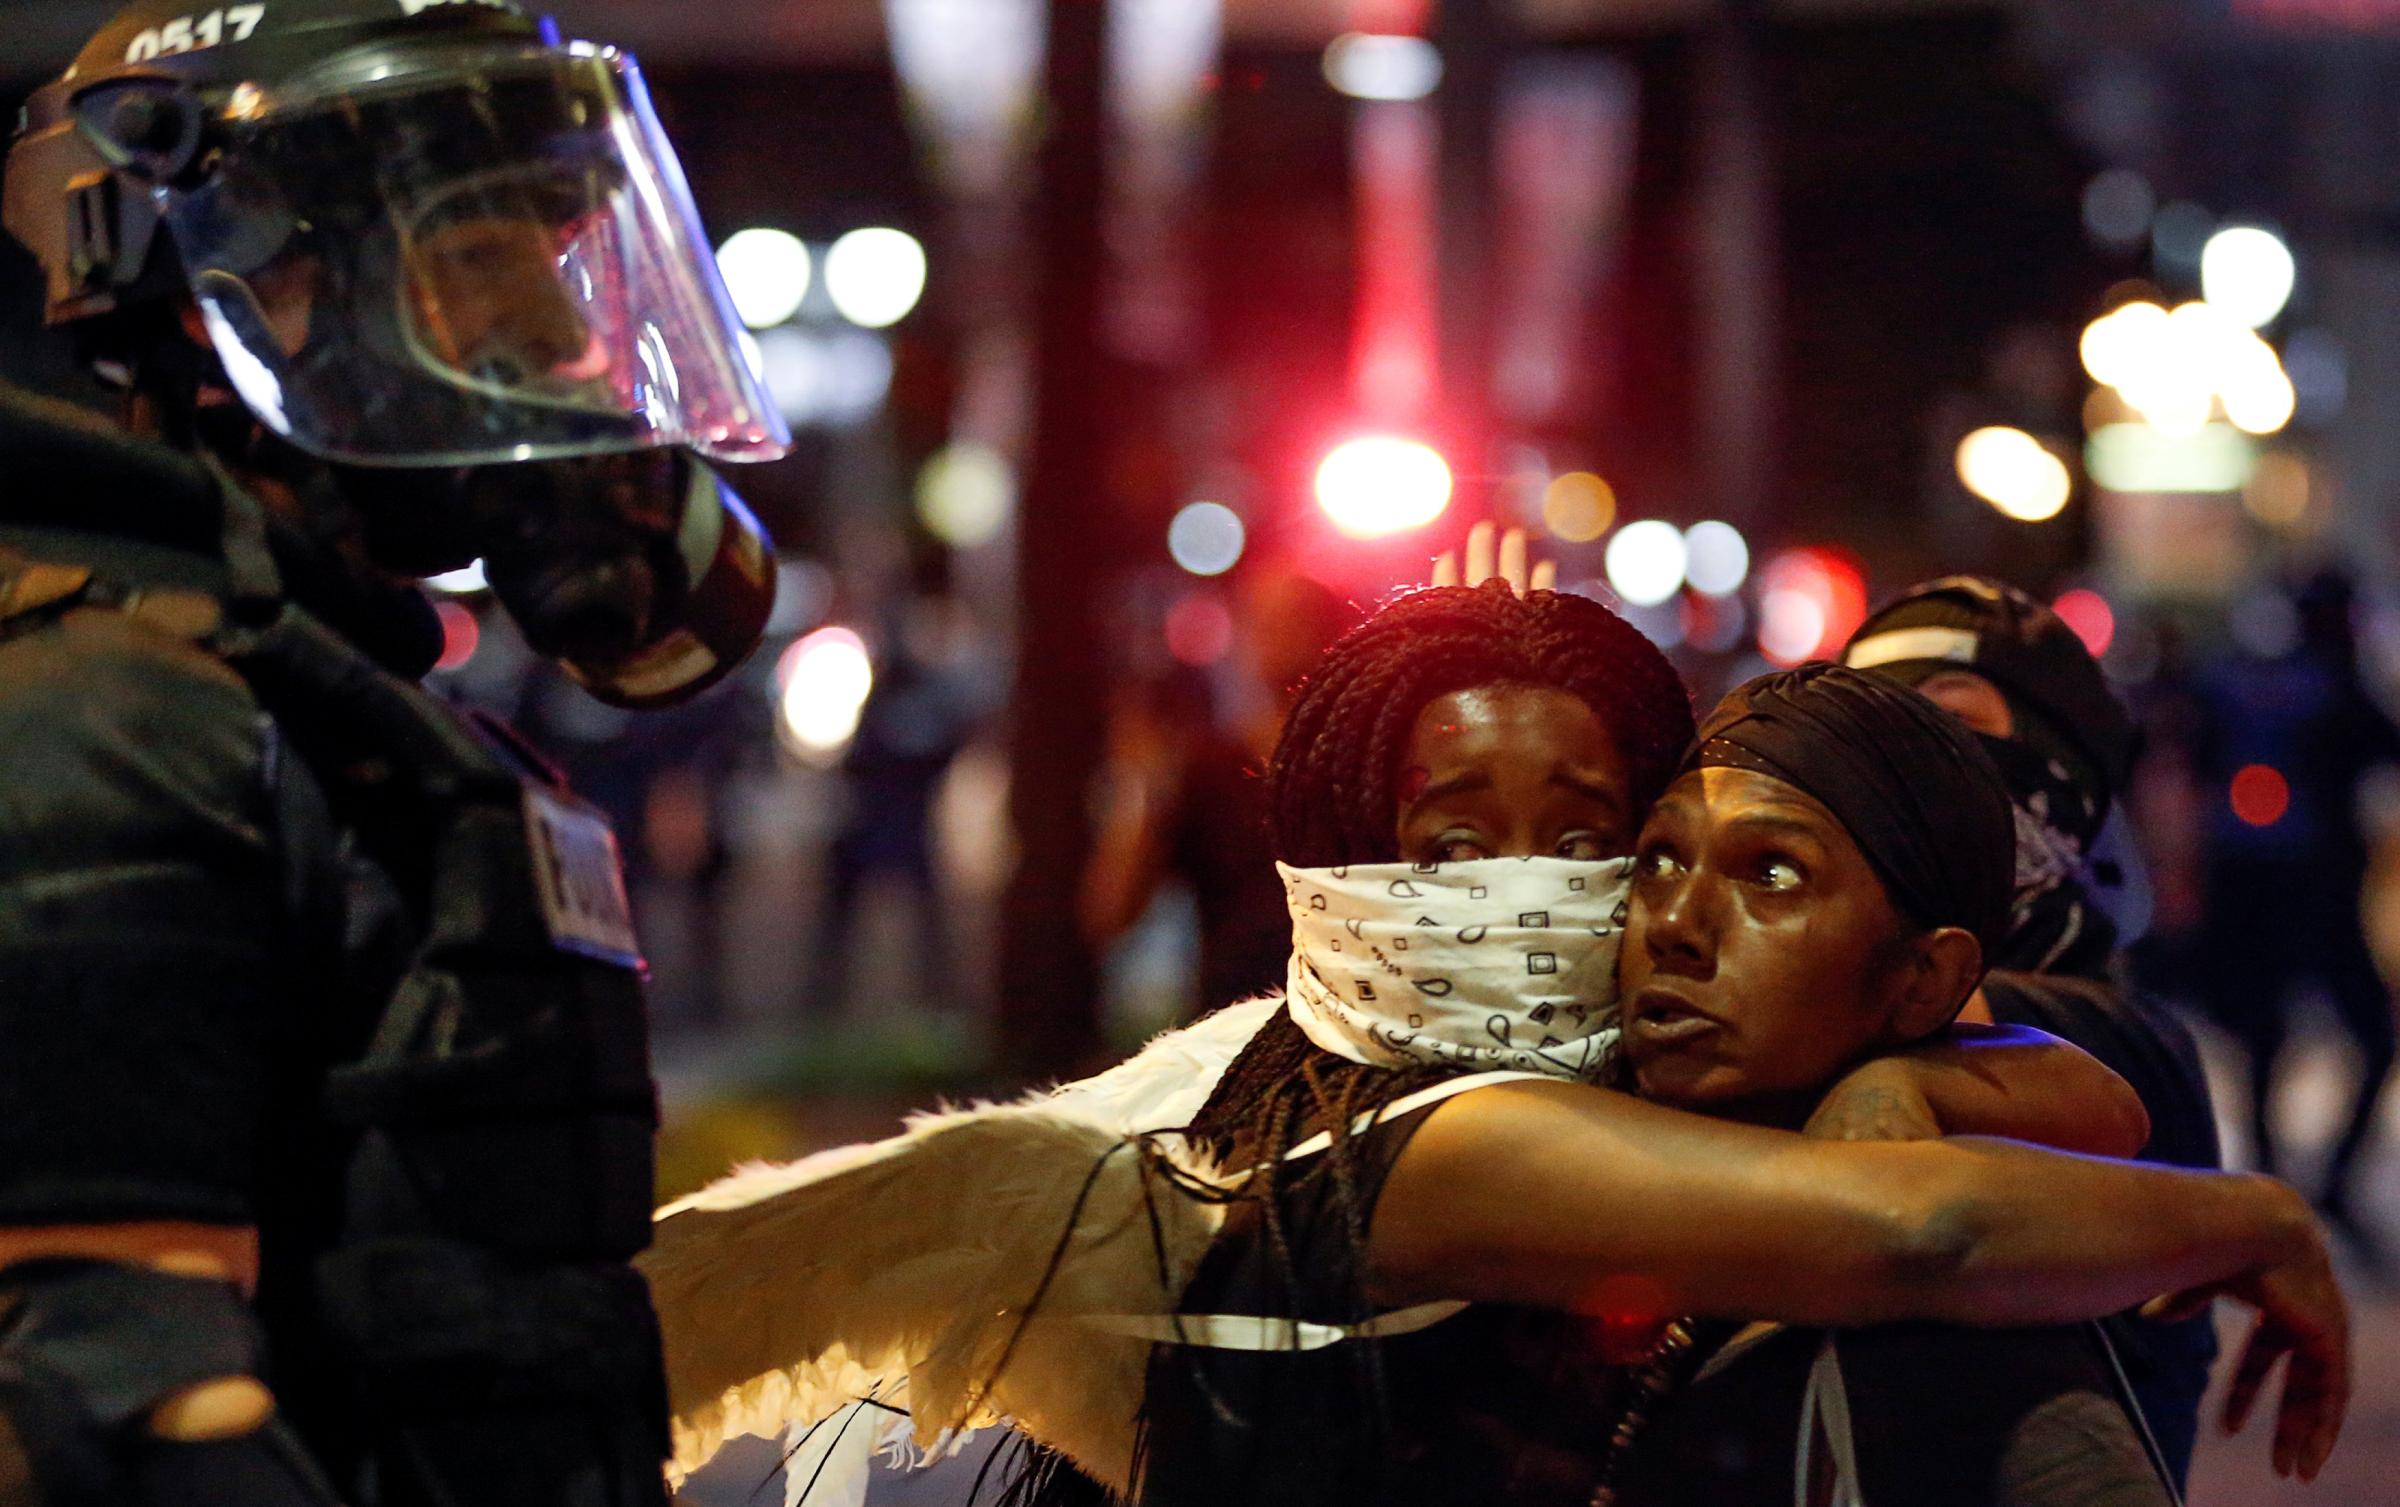 Two women embrace while looking at a police officer in uptown Charlotte, NC during a protest of the police shooting of Keith Scott, in Charlotte